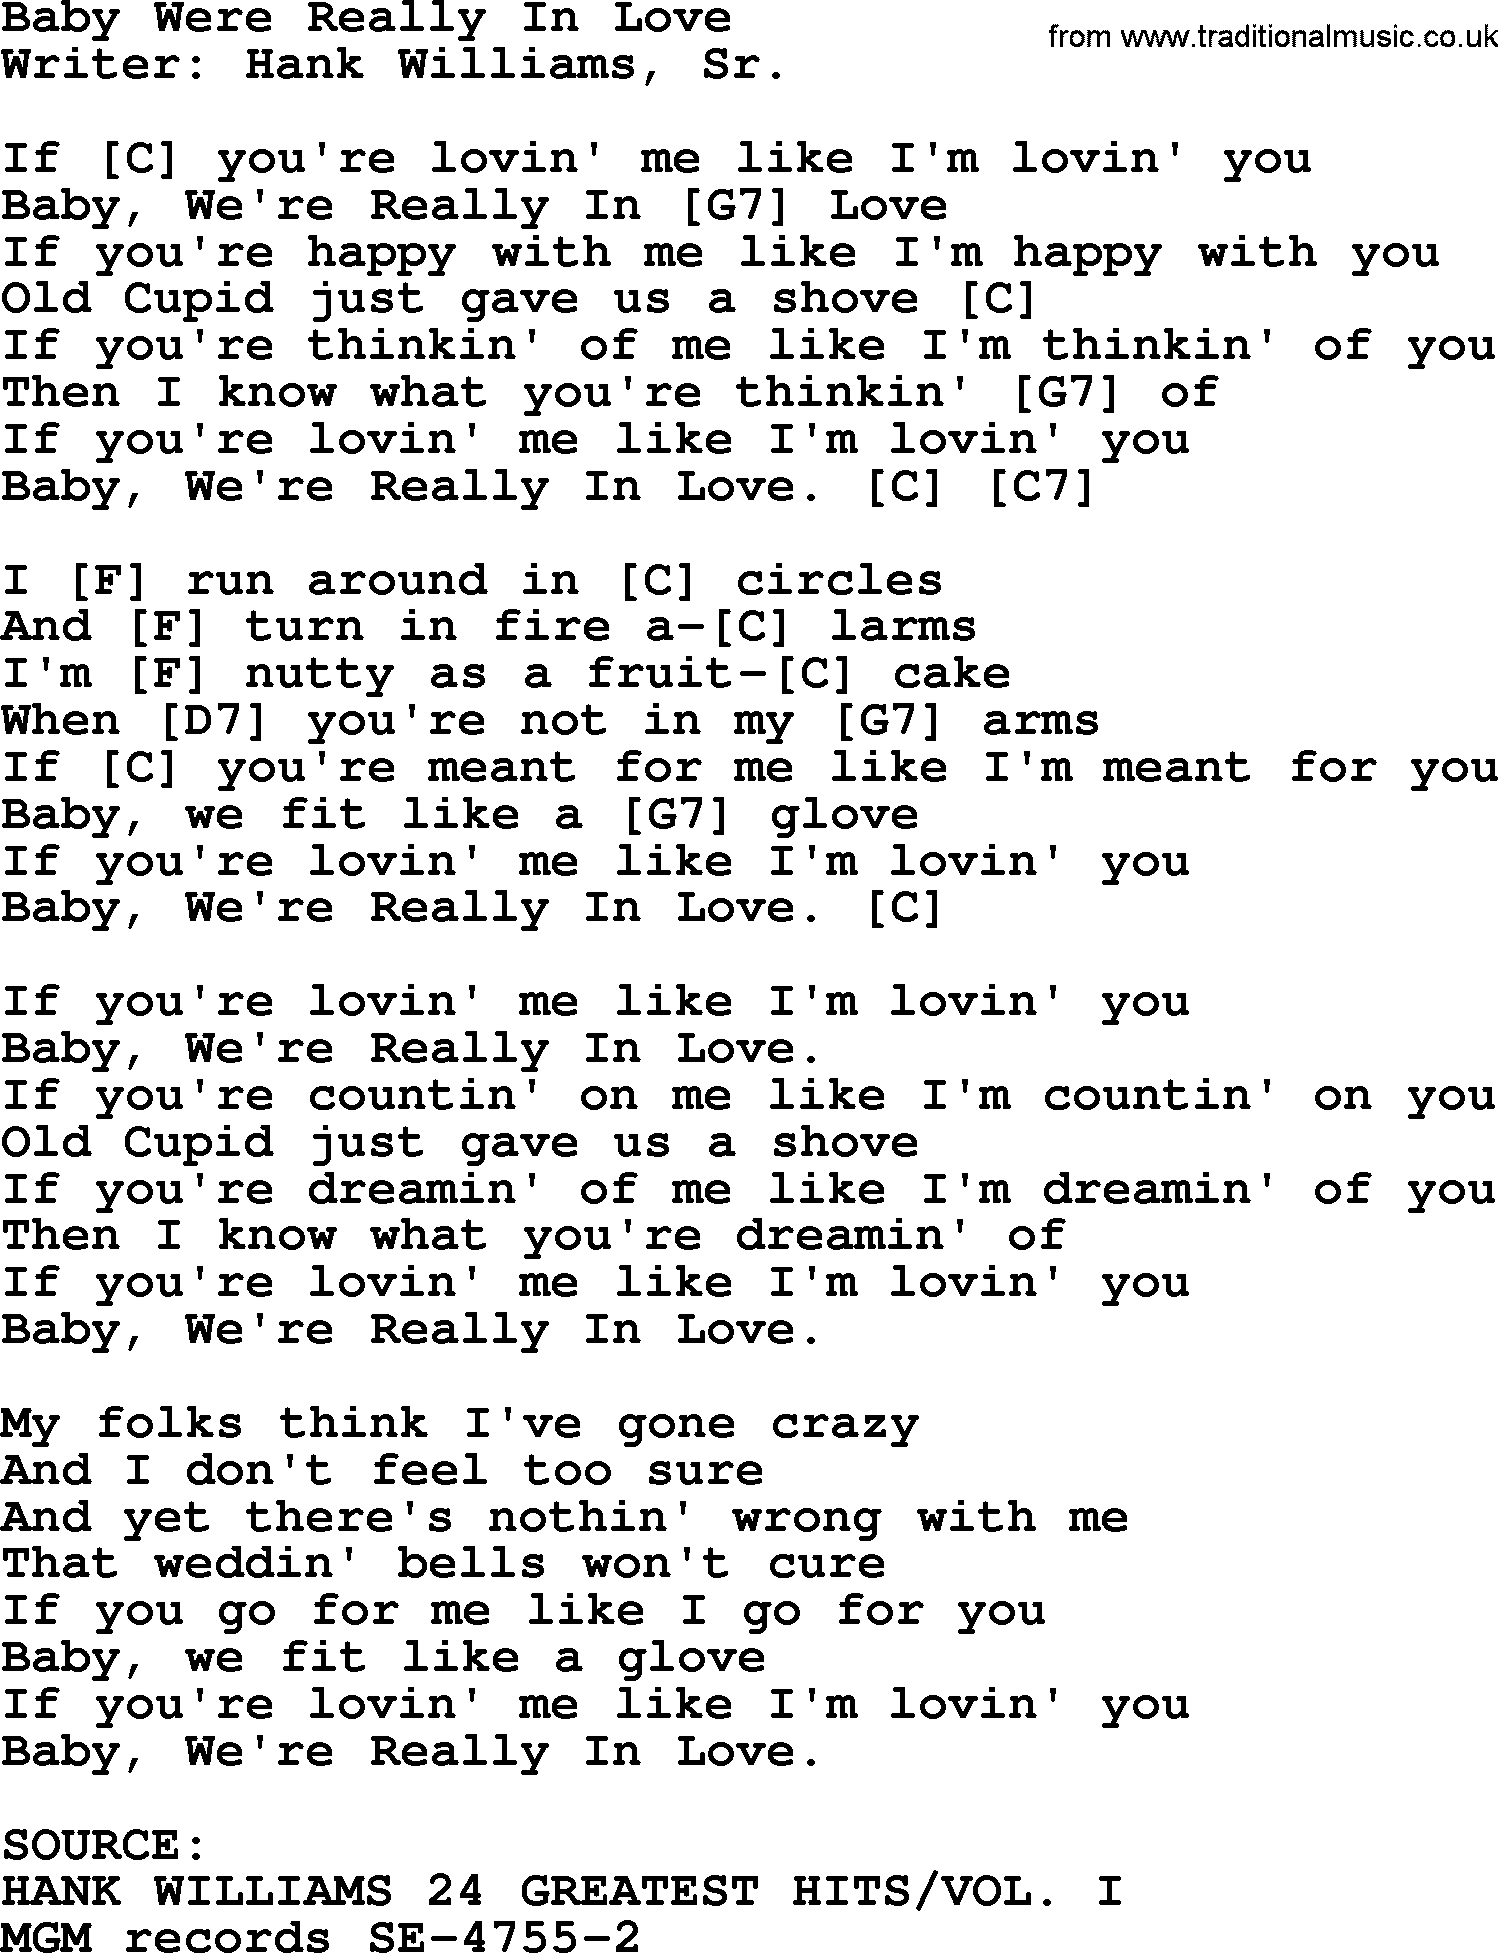 Hank Williams song Baby Were Really In Love, lyrics and chords